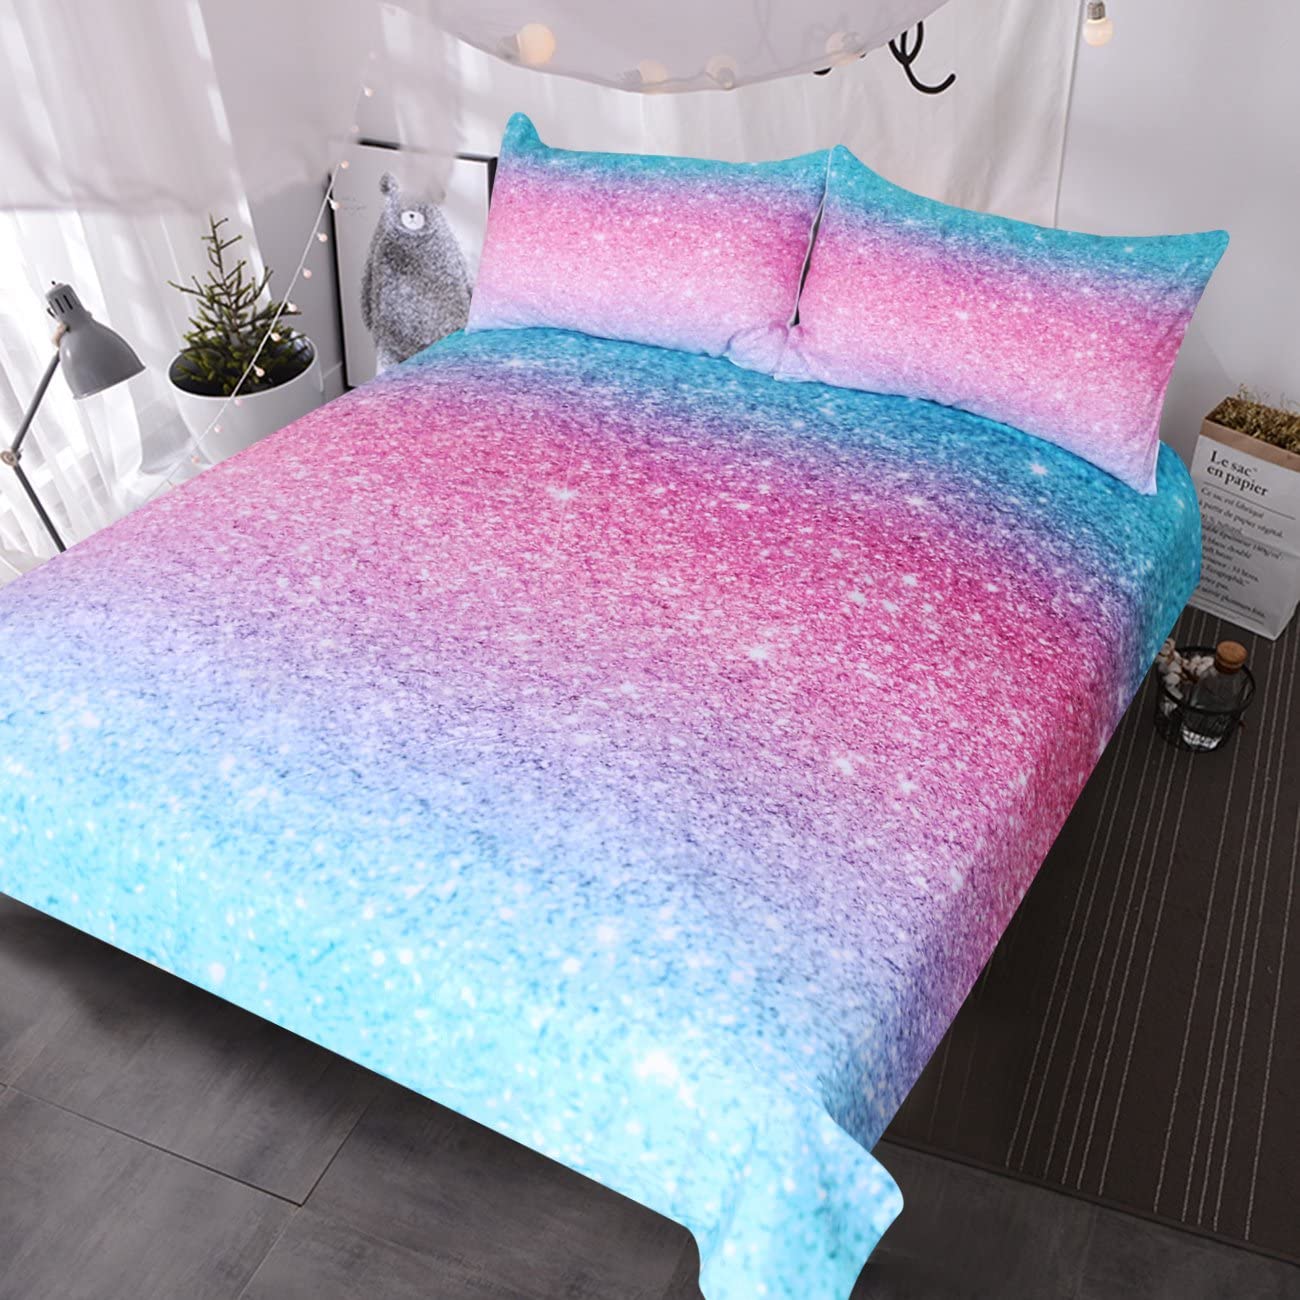 BlessLiving Colorful Glitter Mermaid Bedding Girly Turquoise Blue Pink and Purpl